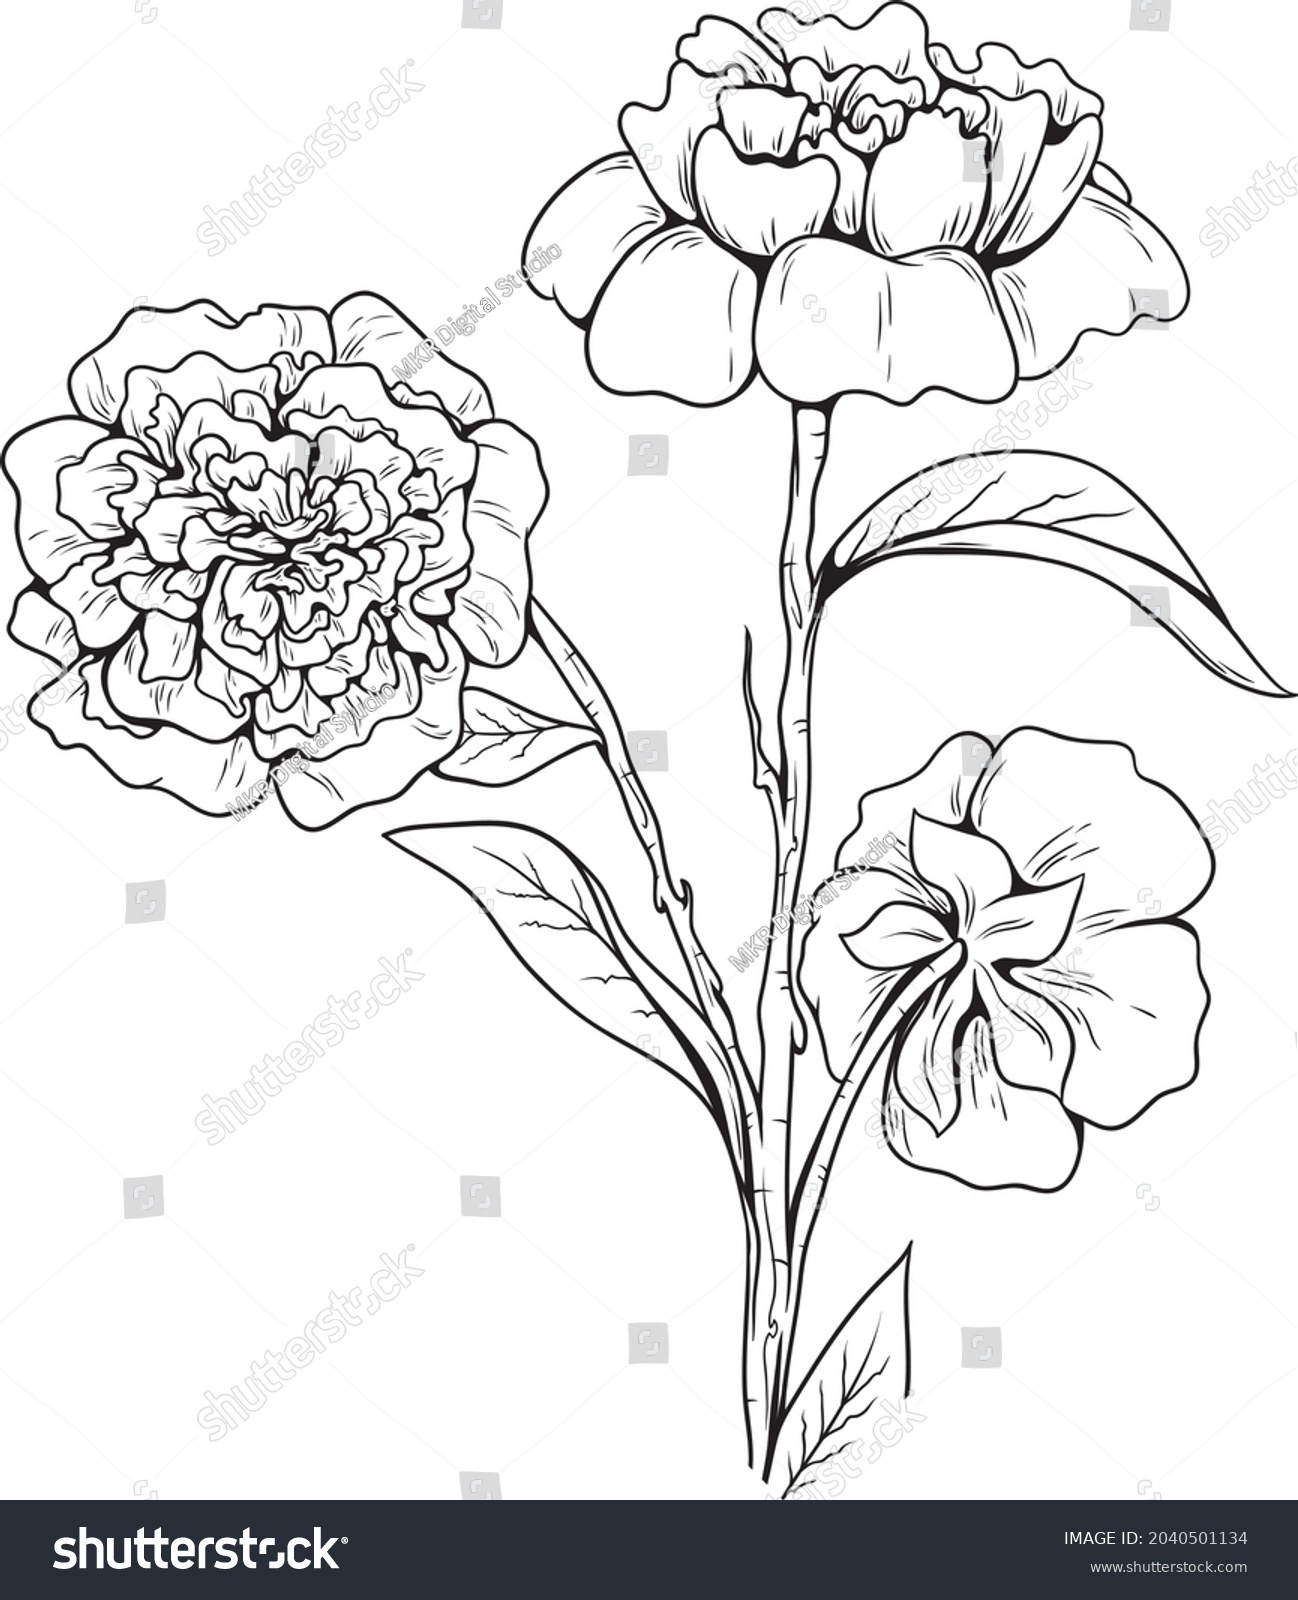 Sketch Bouquet Flowers Peonies Stock Vector (Royalty Free) 2040501134 ...